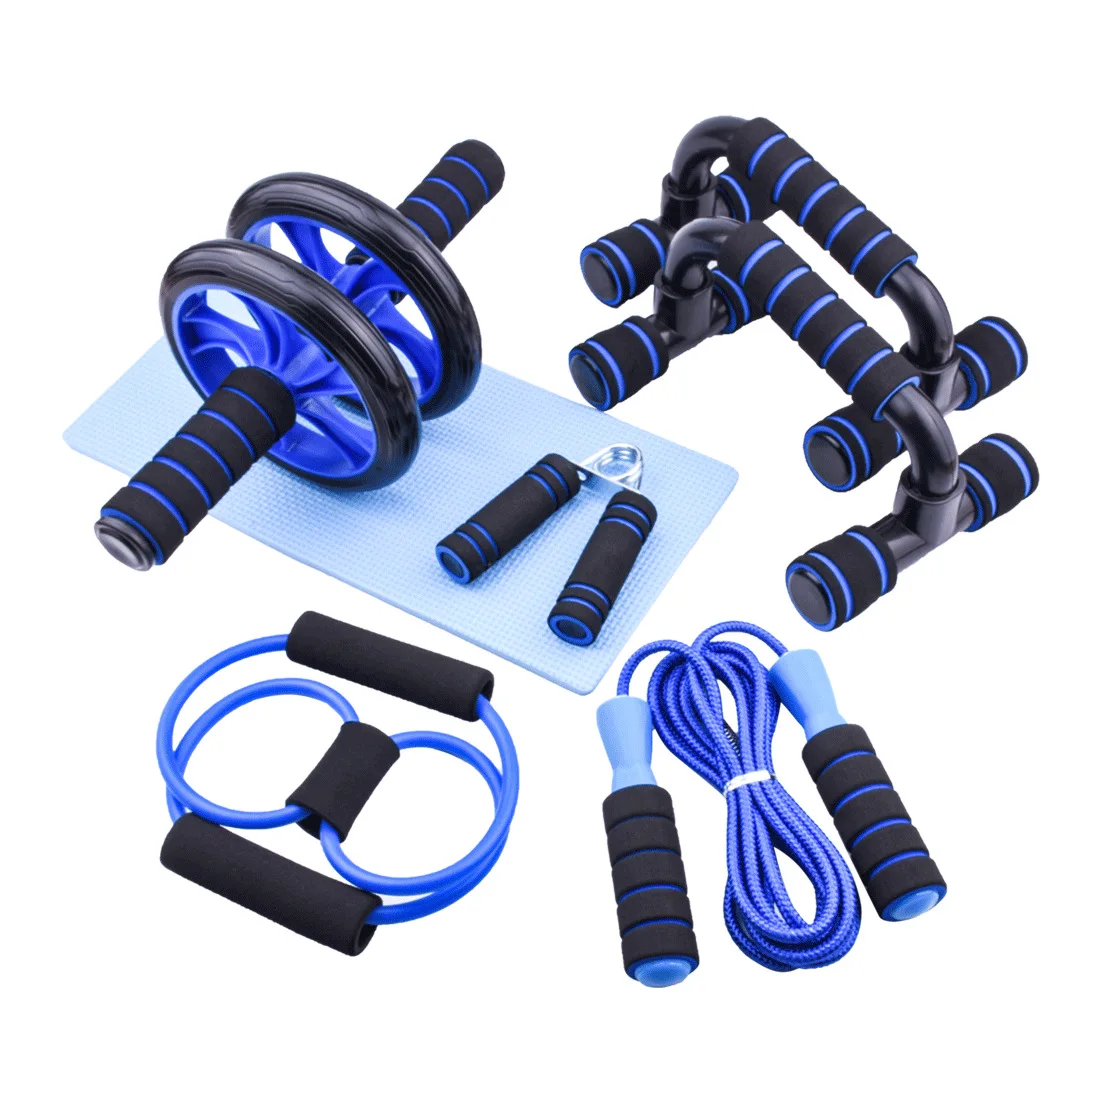 

7-in-1 Ab Roller Kit with Knee Pad Resistance Bands Push Up Bars Skipping Rope Handles Grips for Home Gym Equipment Set, Blue,green, black